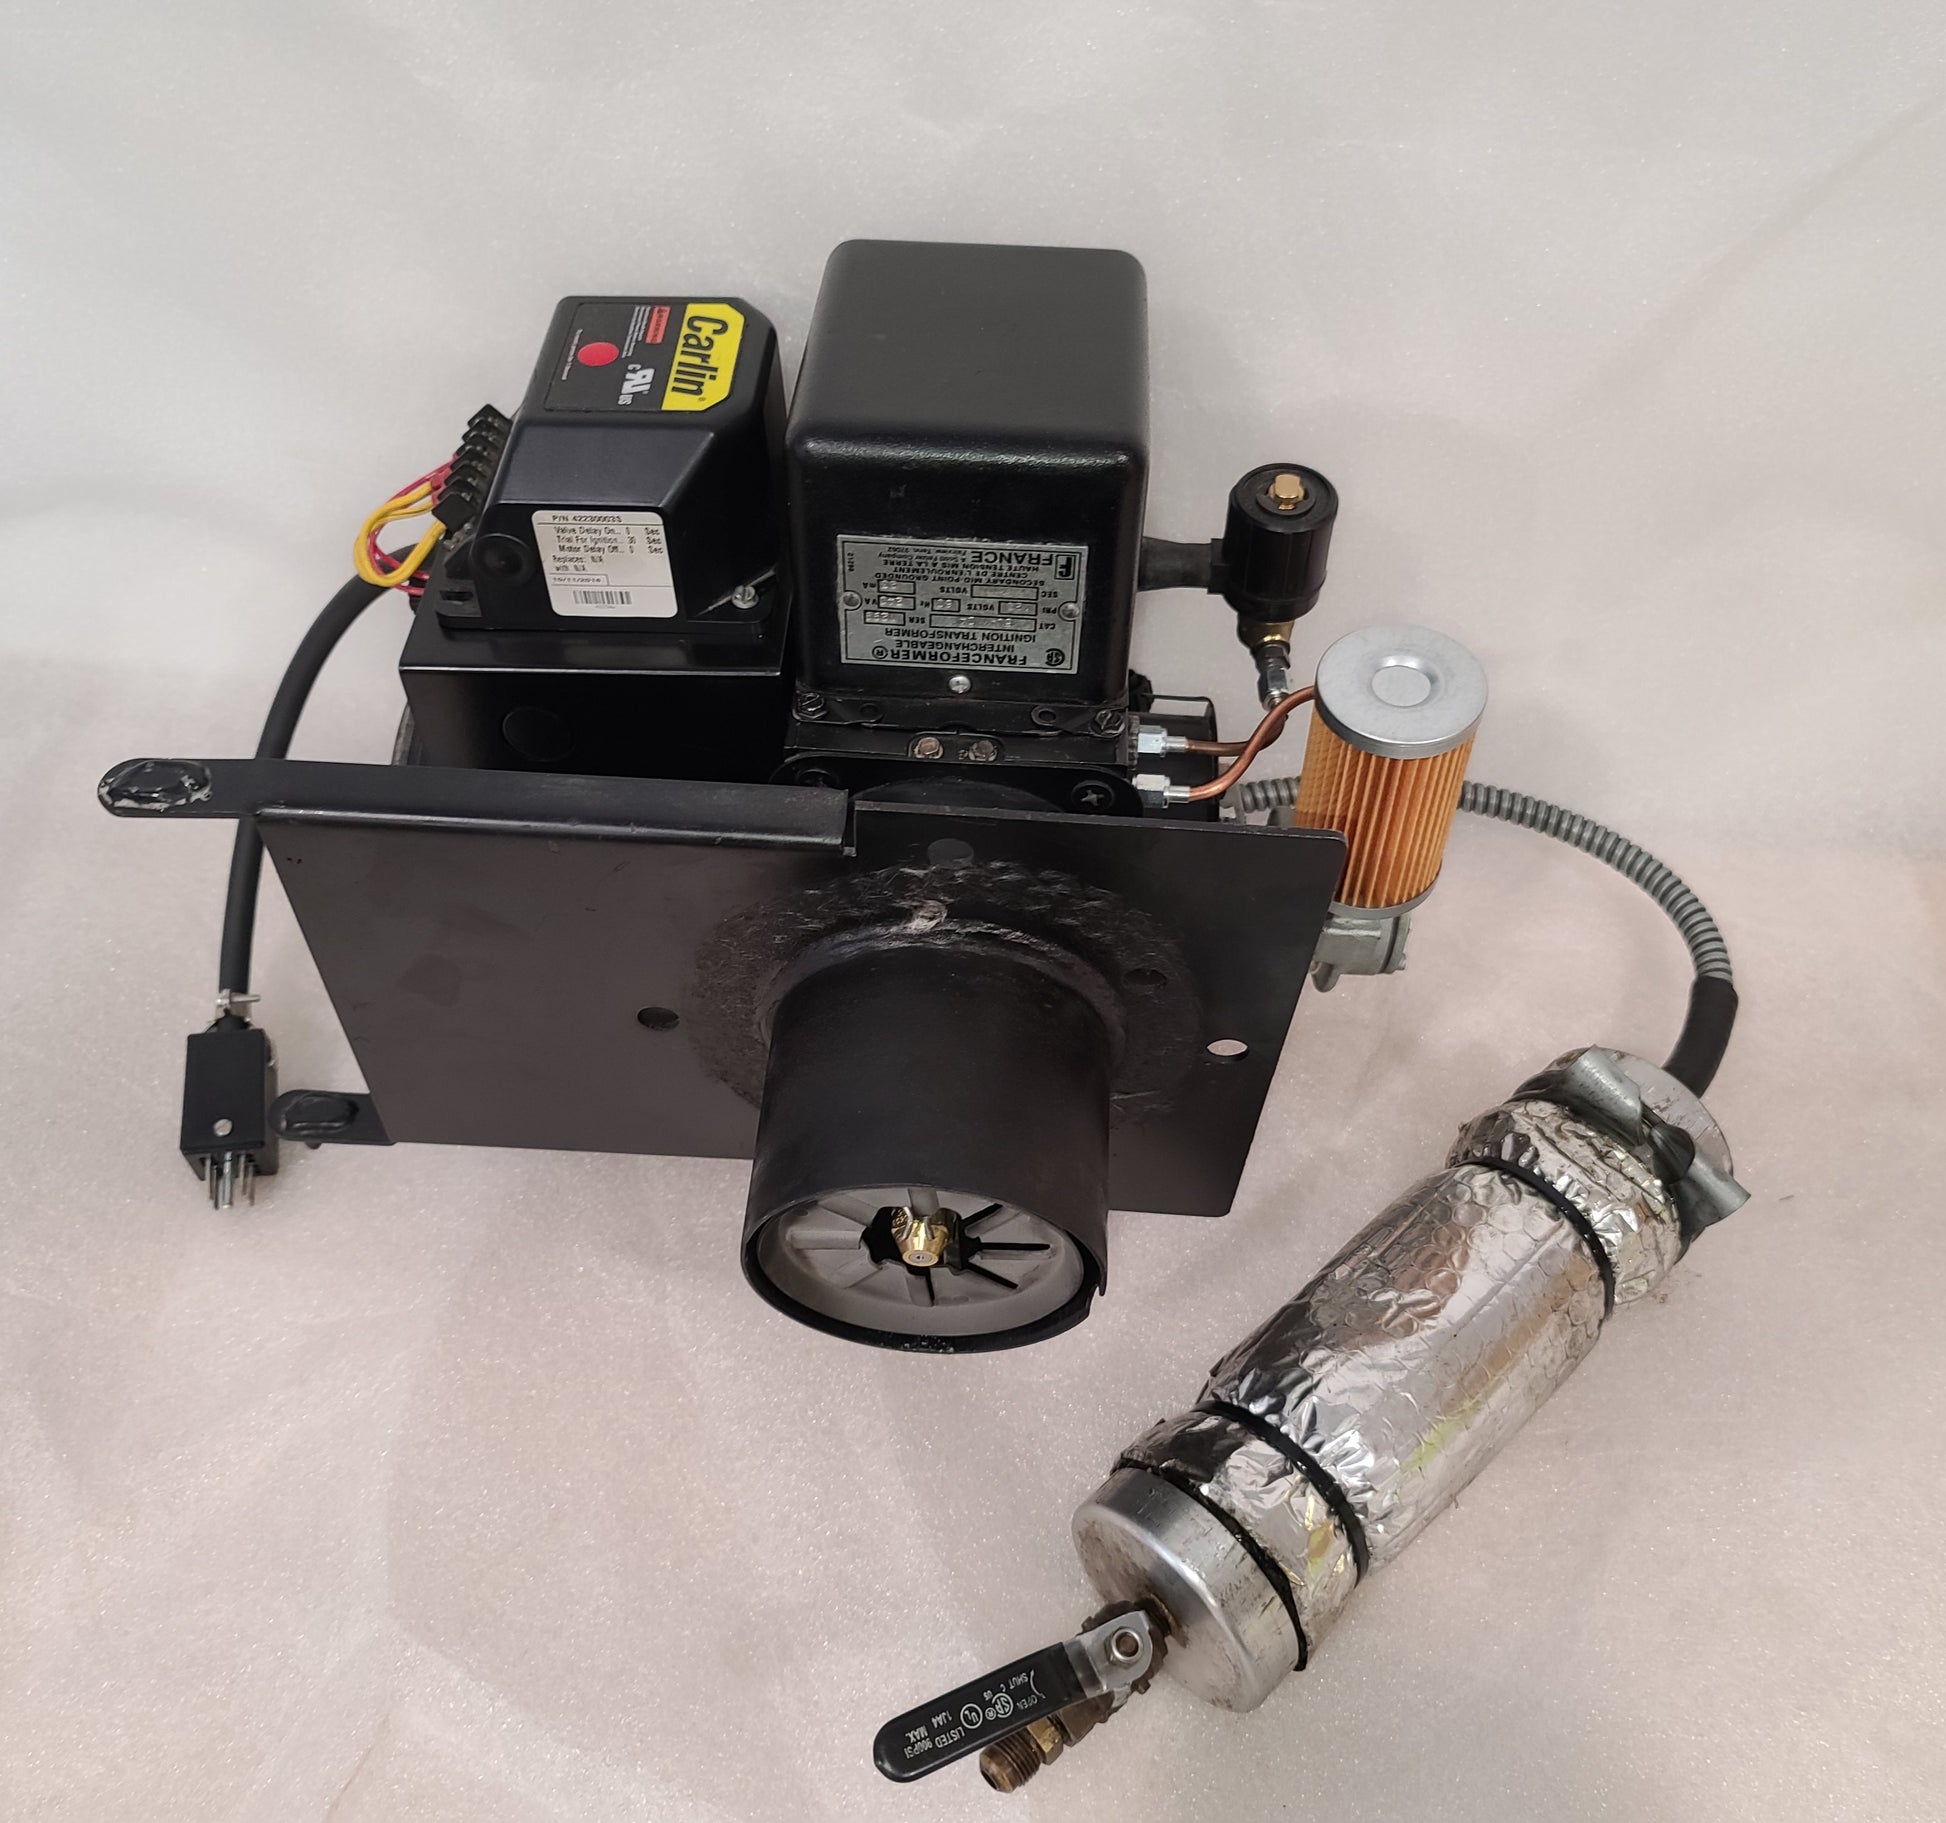 Shop - Diesel Plug in Burner System (Gas or Electric) by A&A Melters